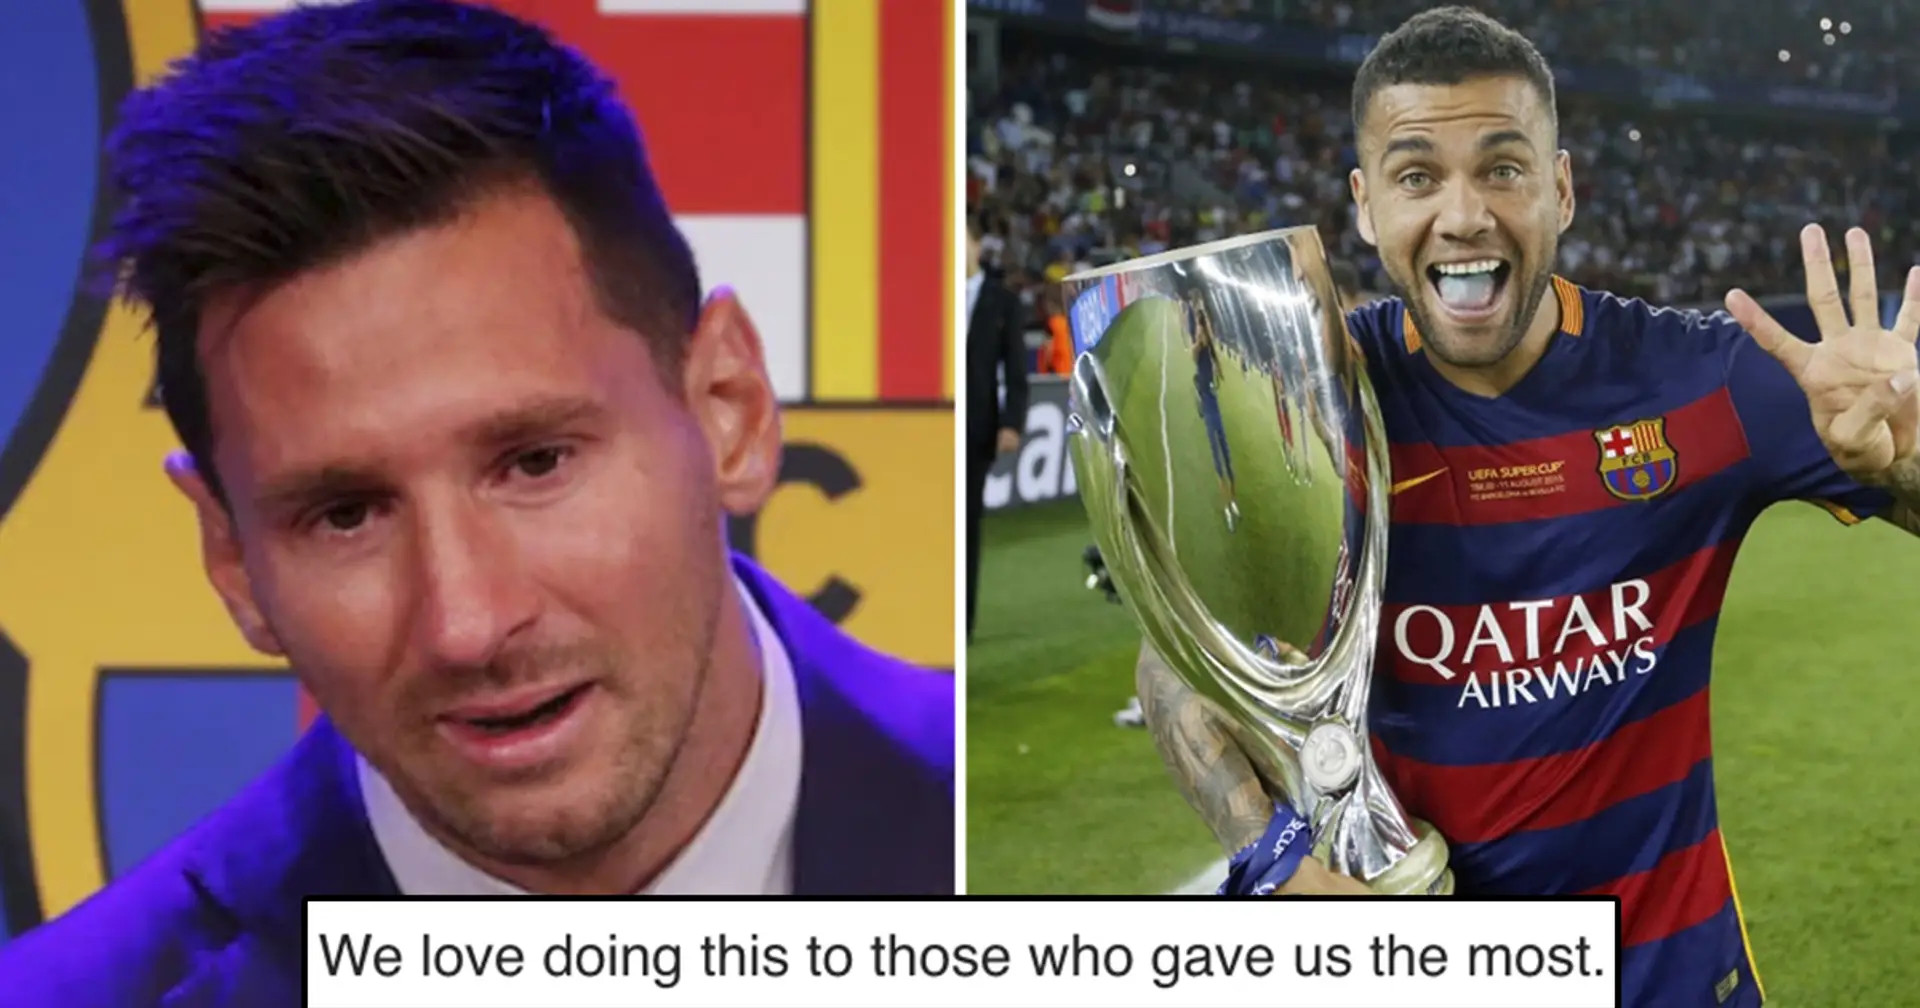 'Self-destructive environment': Cule mentions one 'sad' thing about the way Barca treat their legends lately